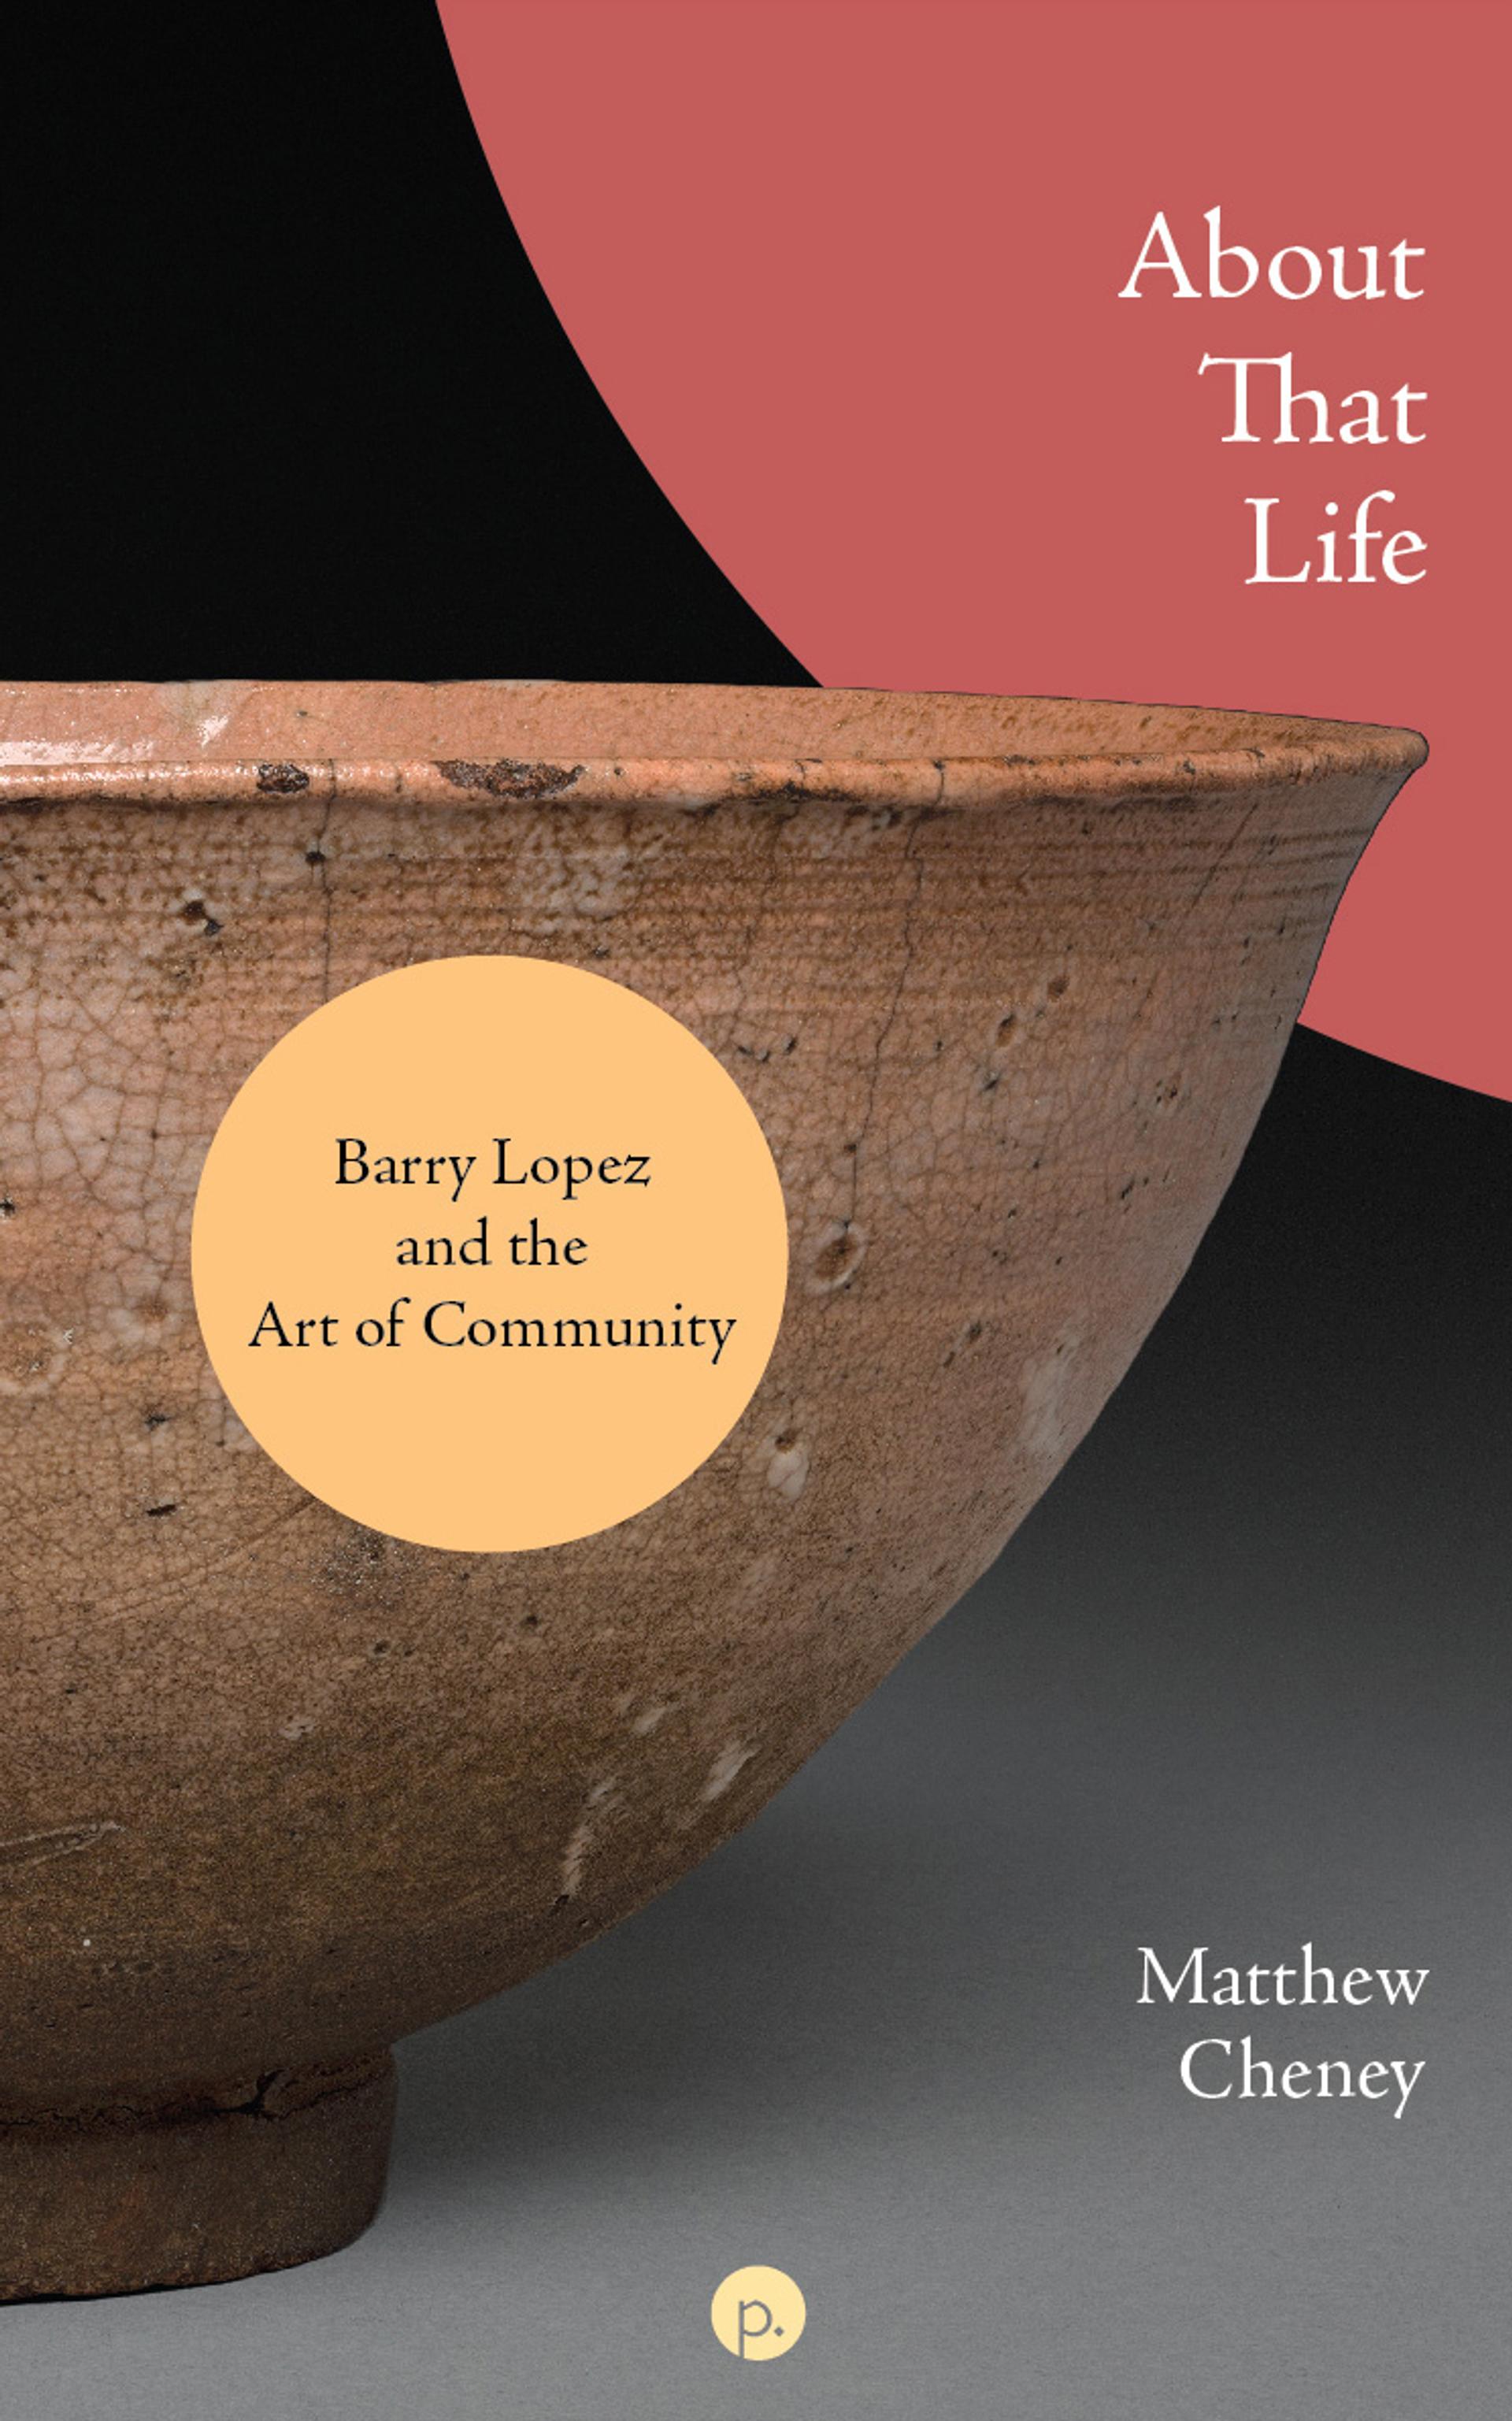 Cover of book titled About That Life: Barry Lopez and the Art of Community